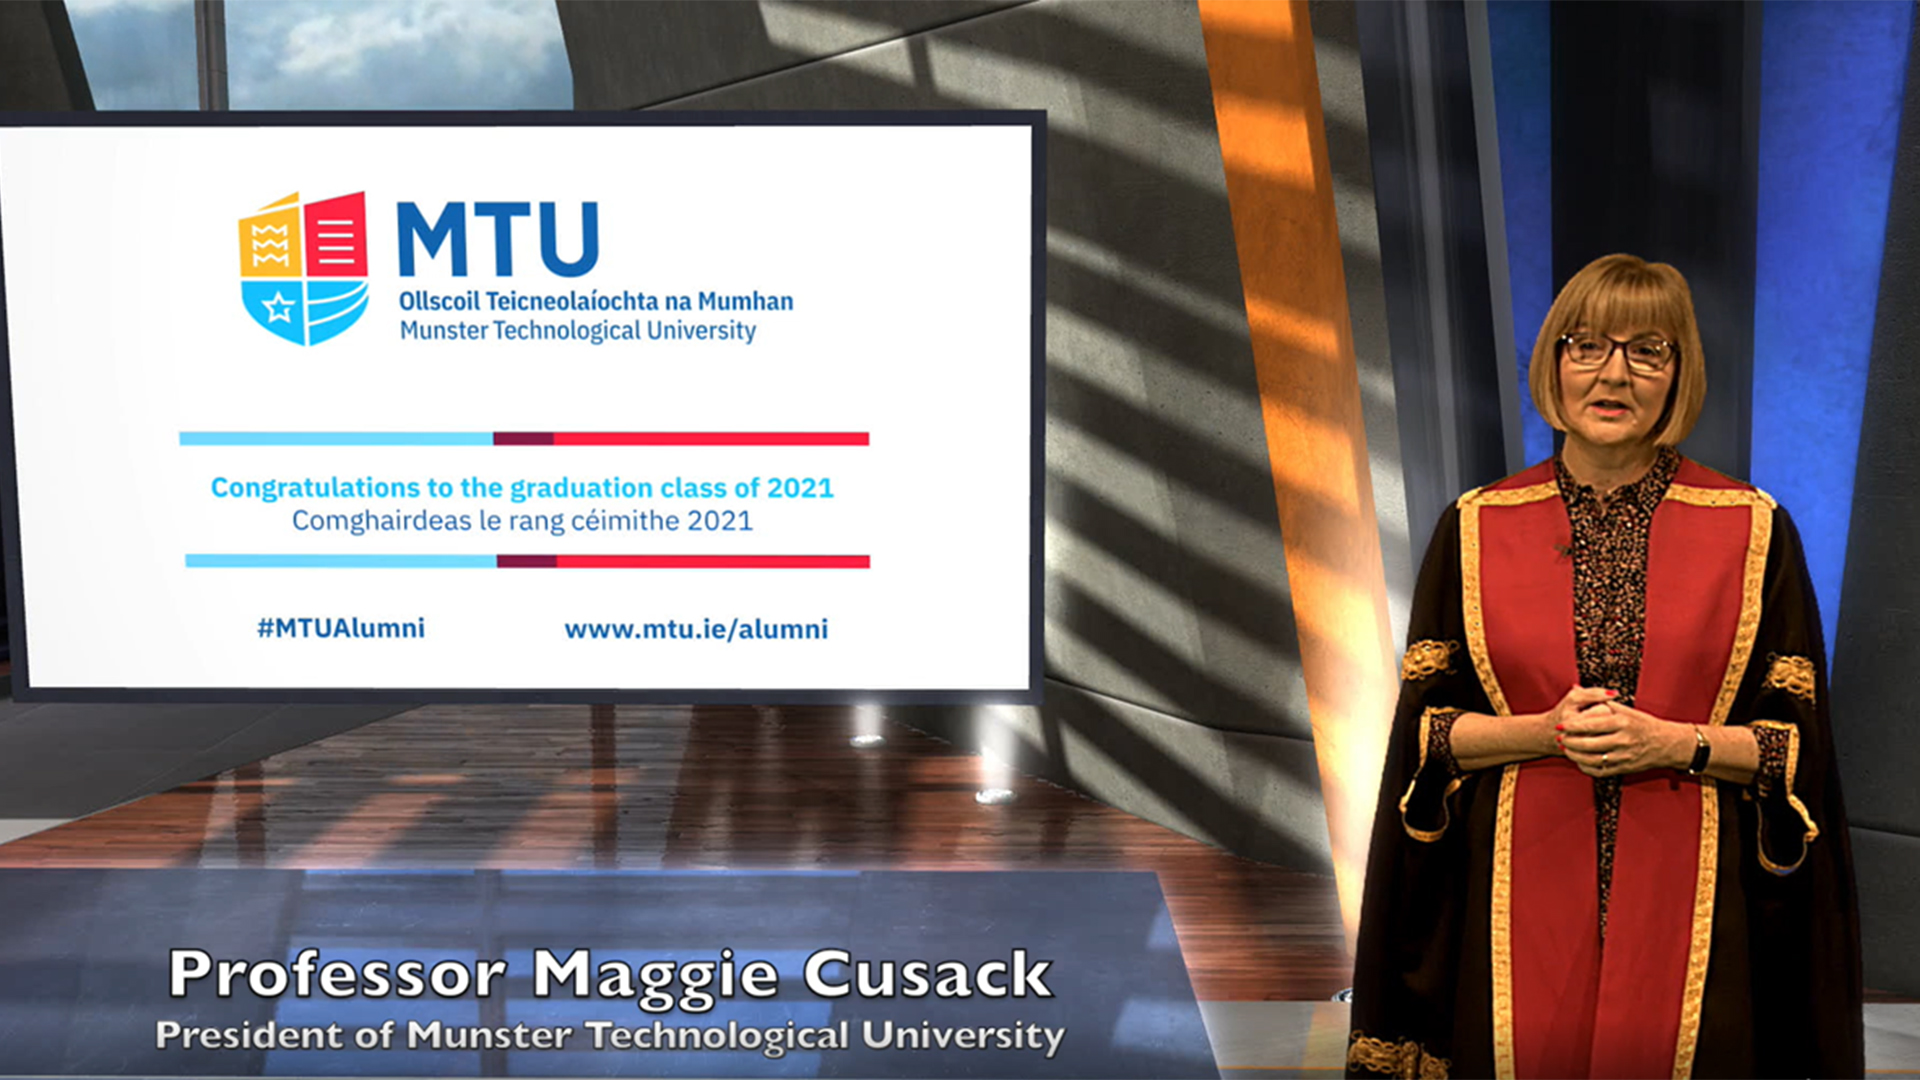 The first Conferring Ceremony of the Munster Technological University 2021 and was led by the President, Professor Maggie Cusack. Due to current Covid-19 guidelines the Conferring Ceremony took place virtually